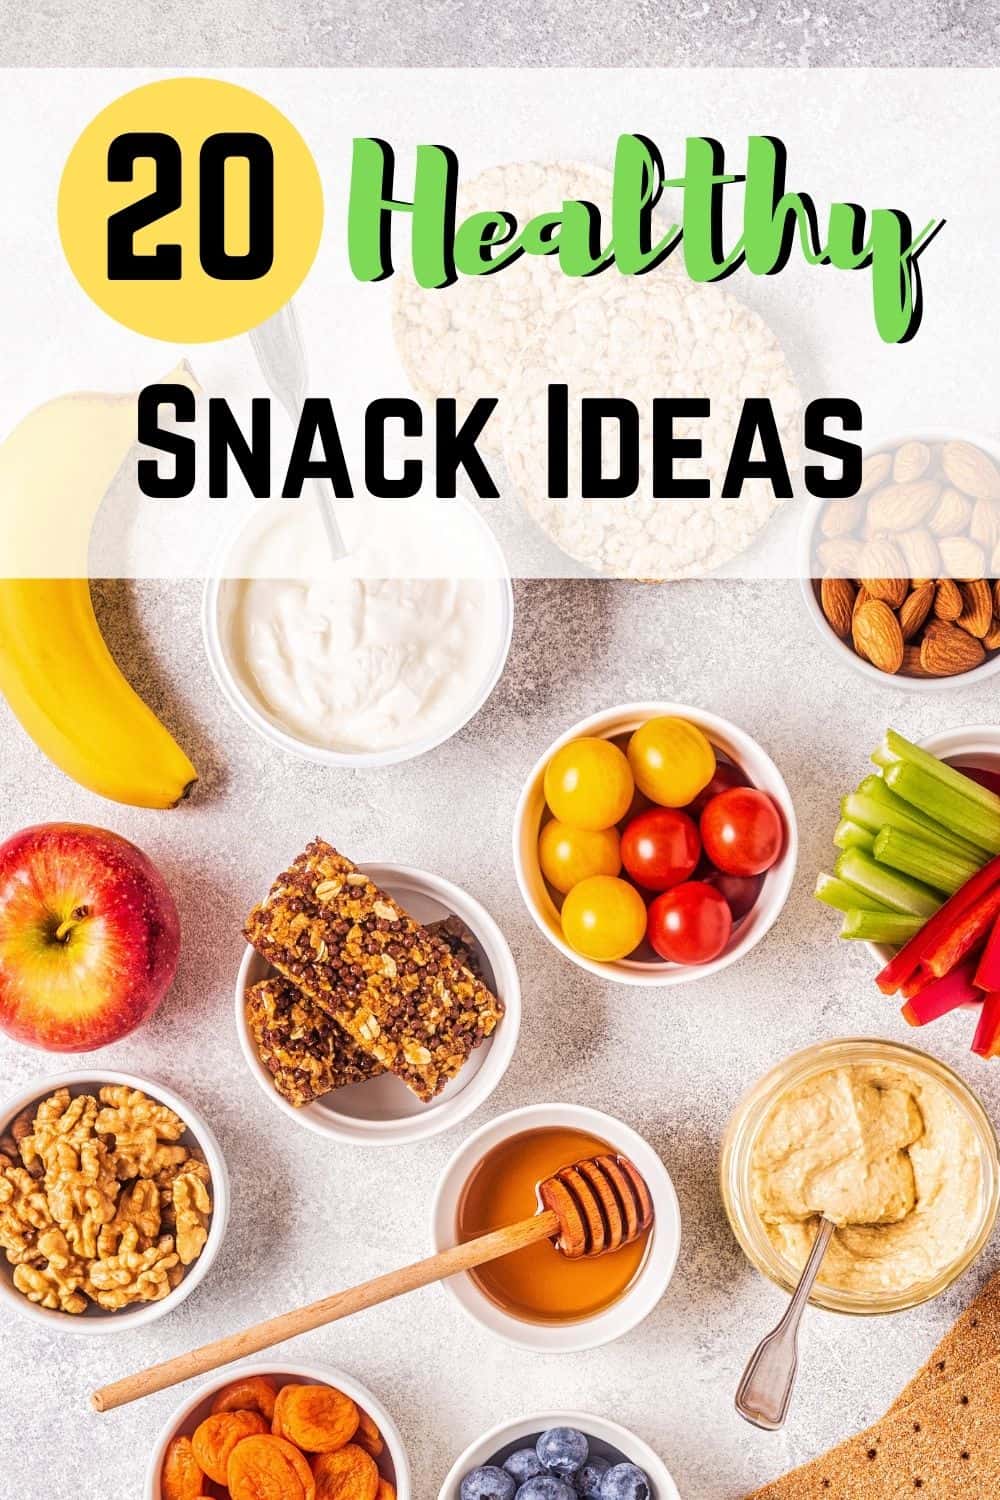 Do you struggle finding healthy snack options on the go? These super simple snack ideas are healthy and can be pulled together in minutes. |healthy snacks | simple snacks 